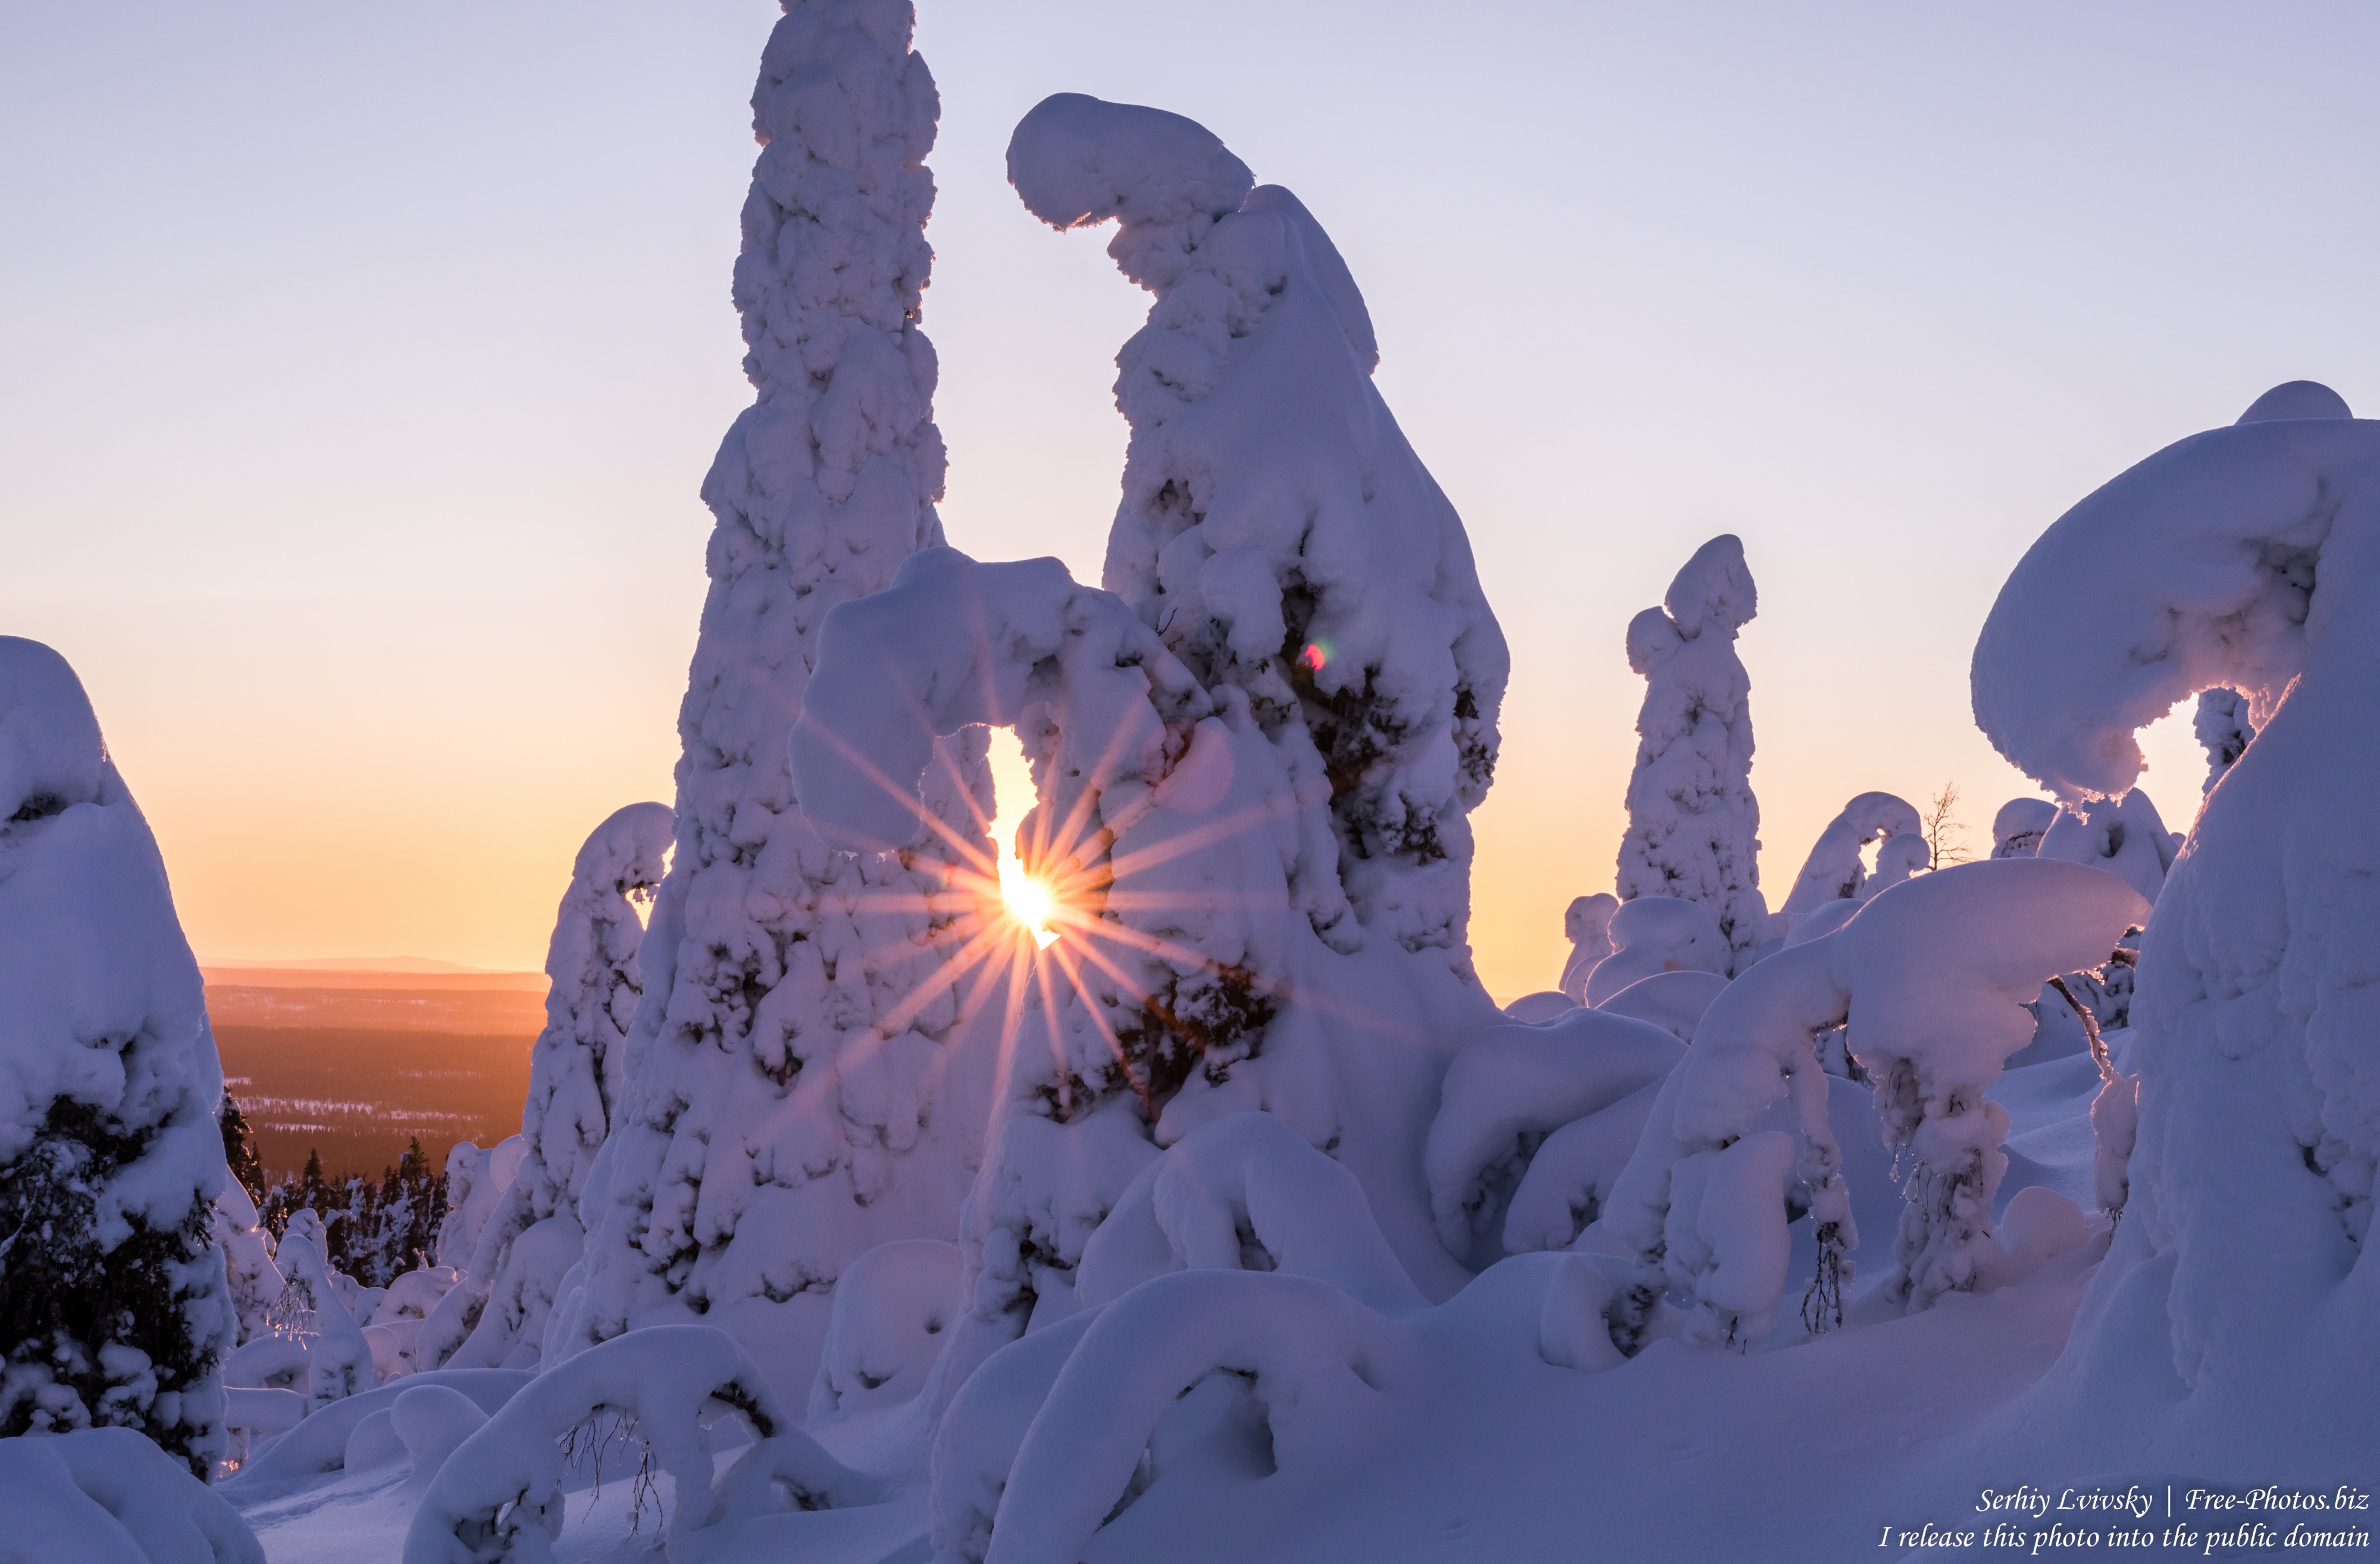 Valtavaara, Finland, photographed in January 2020 by Serhiy Lvivsky, picture 31